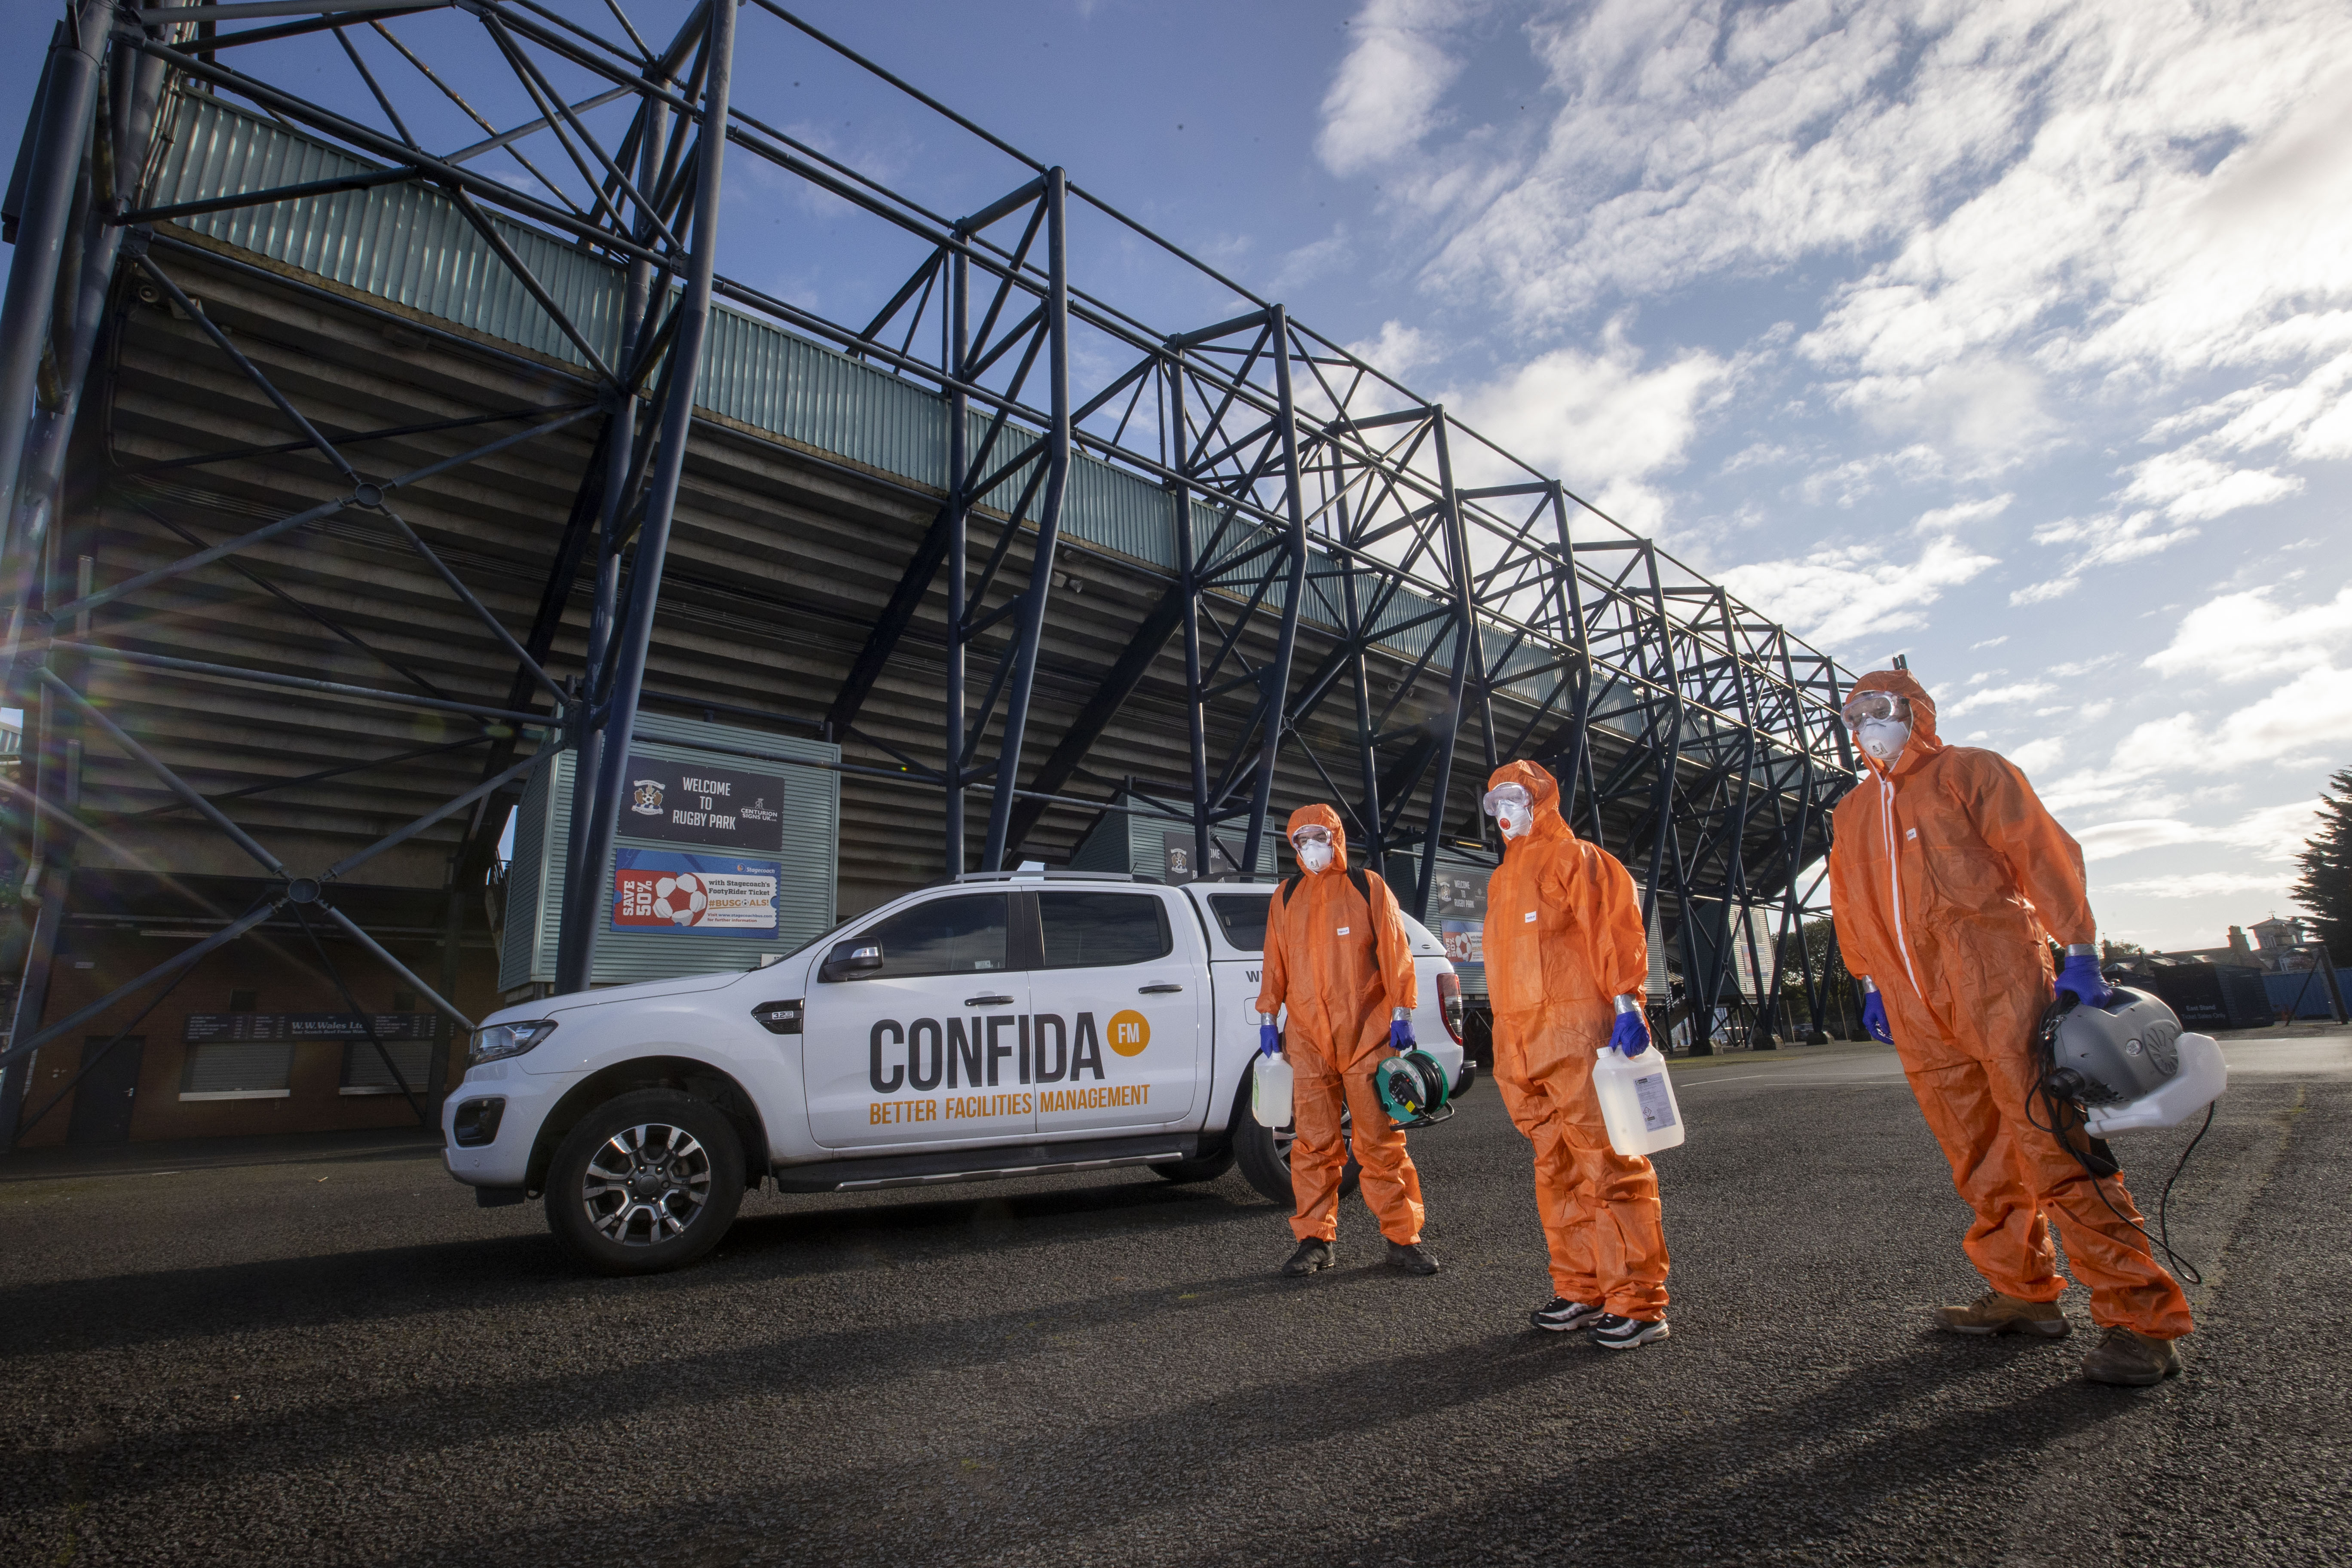 Confida FM creates over 100 new jobs thanks to six-figure funding package from Bank of Scotland